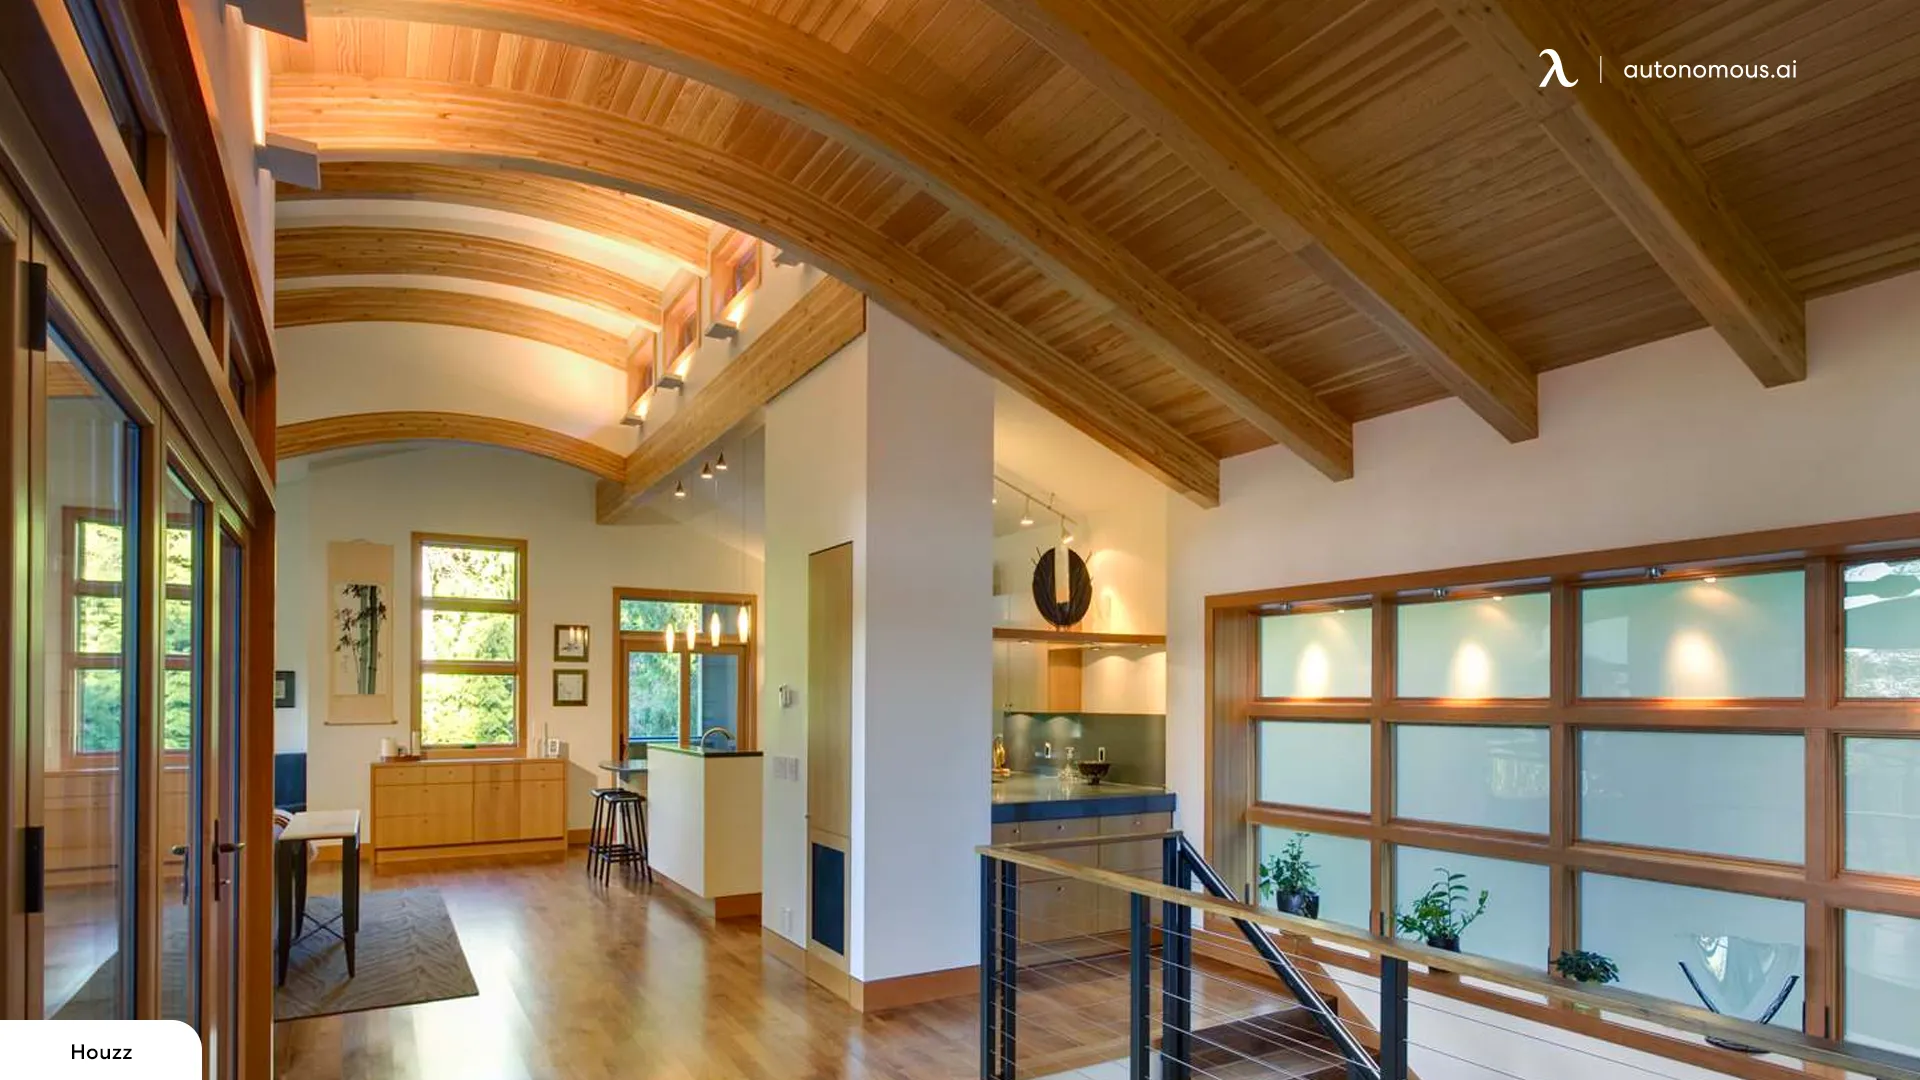 Incorporate Curved Ceilings - Tiny house ceiling ideas